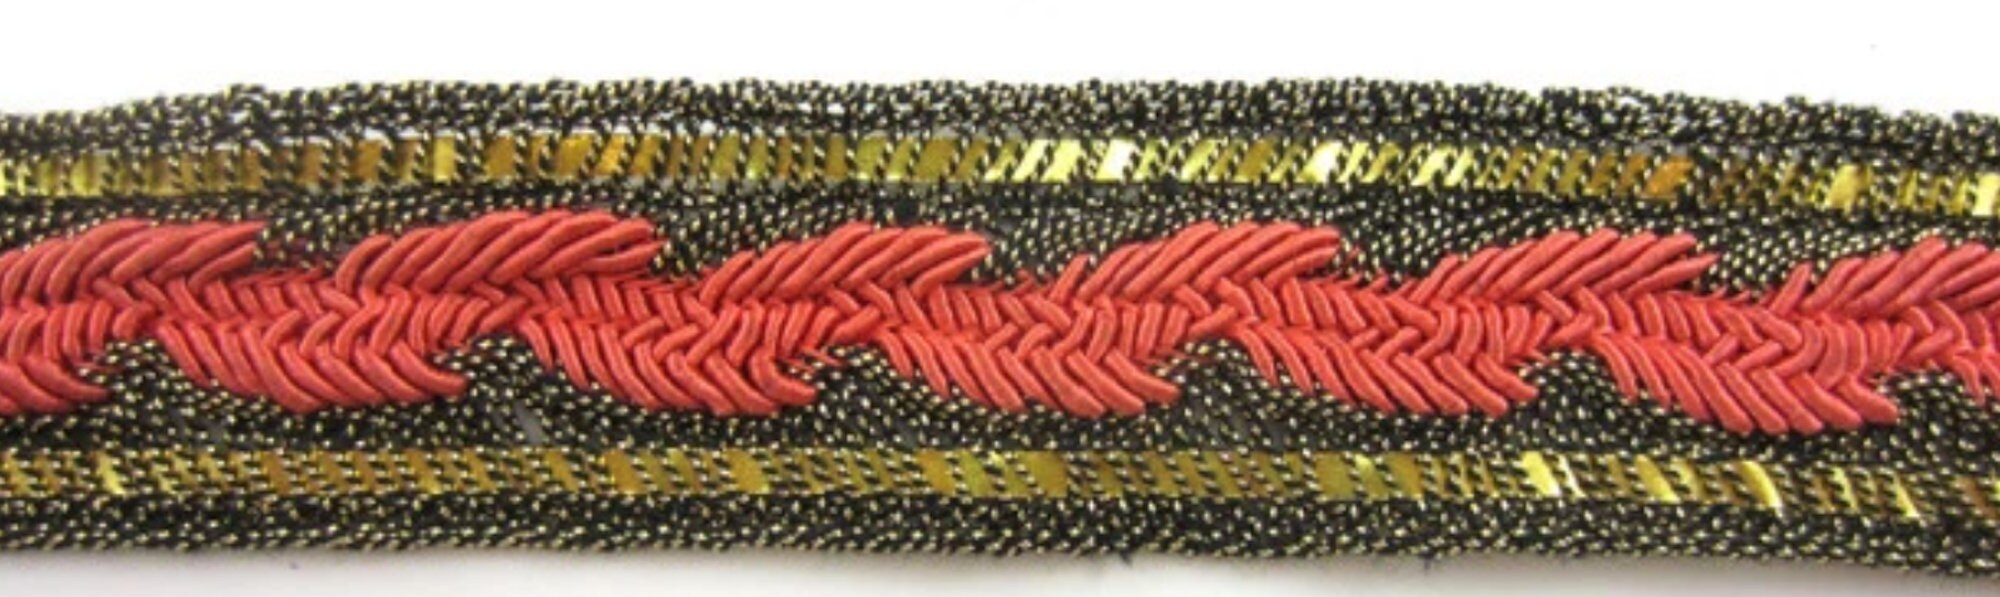 Vintage Trim with Dark Gold Bullion and Coral Thread 1.25 Wide Sold by the Yard1 yd minimum